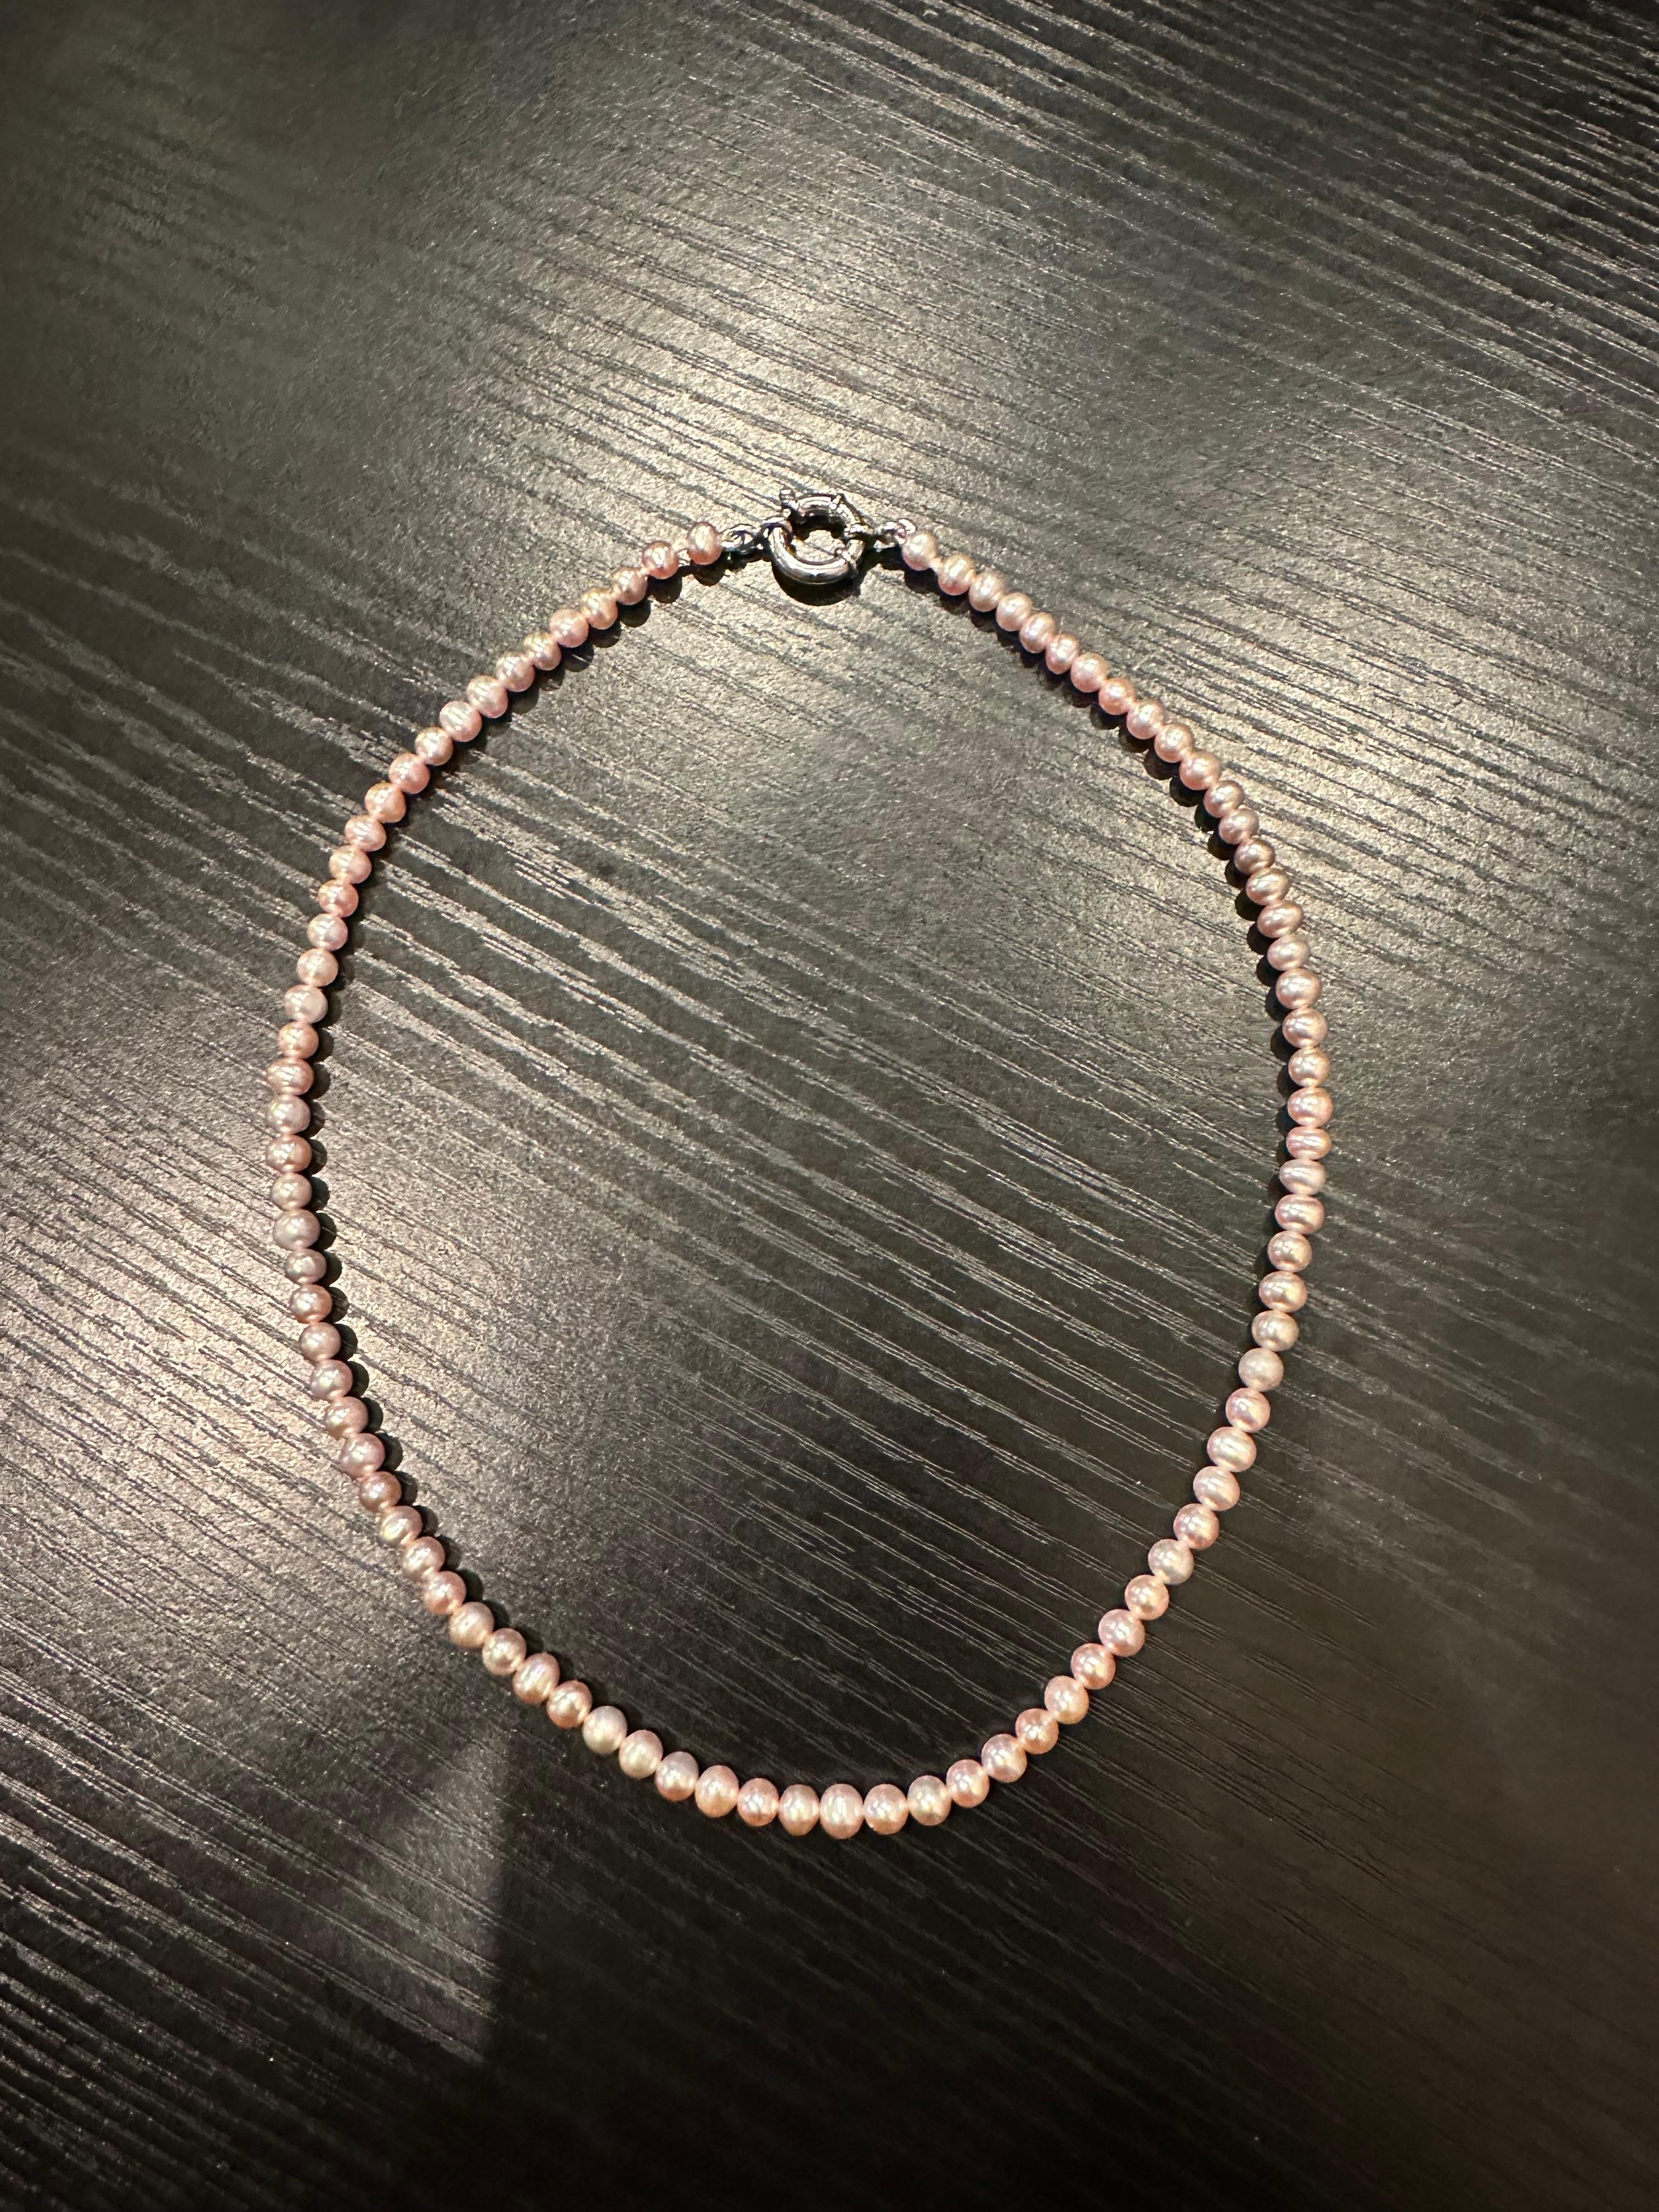 Stunning pink pearl choker with a sterling silver stamped 925 clasp, very elegant, comes with box, certificate of authenticity and nicely packaged! Its 16 inches.

ABOUT US
We are a family-owned business. Our studio in located in the heart of Boca